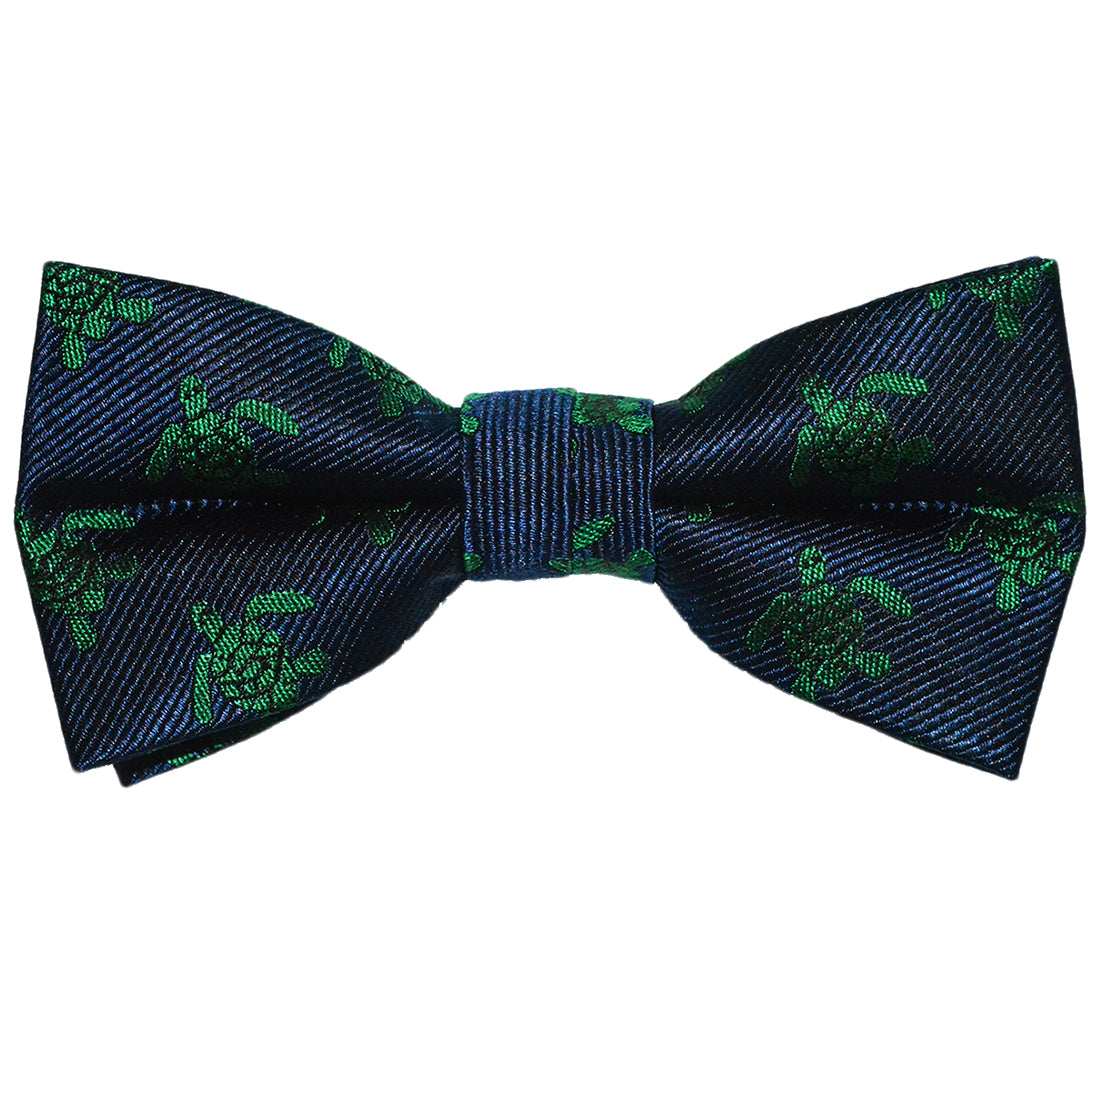 Turtle Bow Tie - Green on Navy, Woven Silk, Pre-Tied for Kids - SummerTies